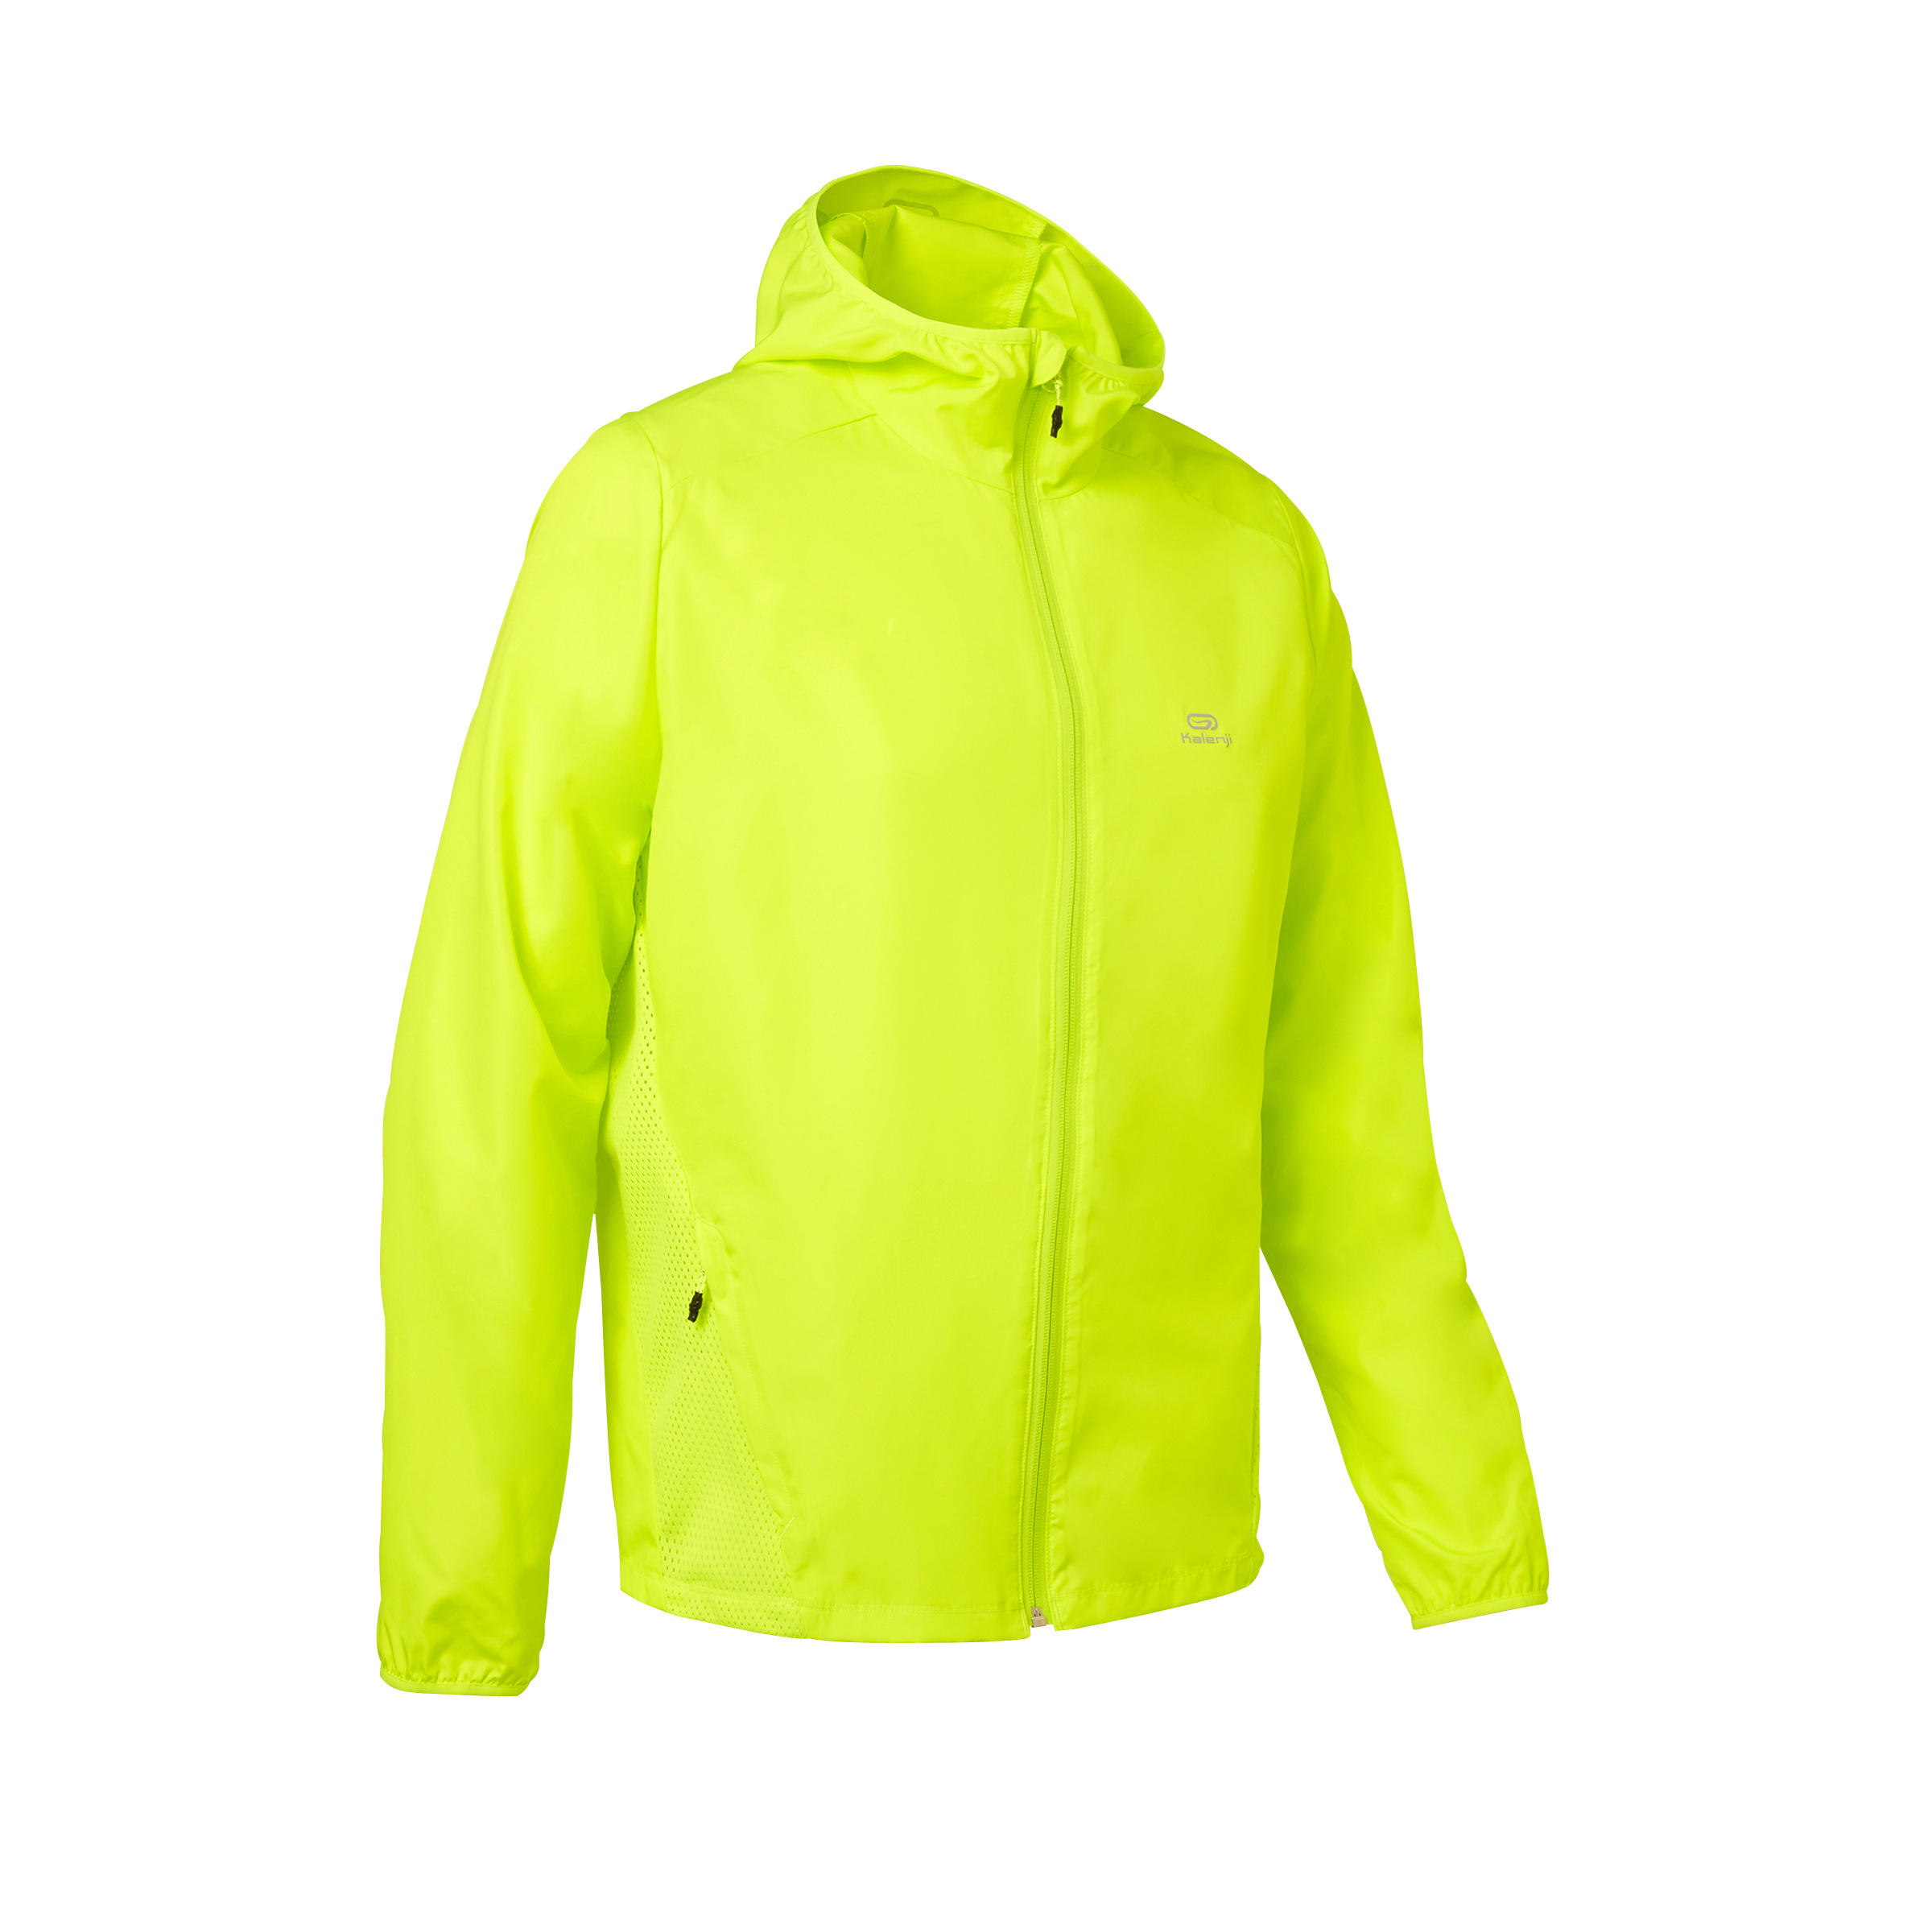 Running Clothes - Mens, Womens & Kids Clothing